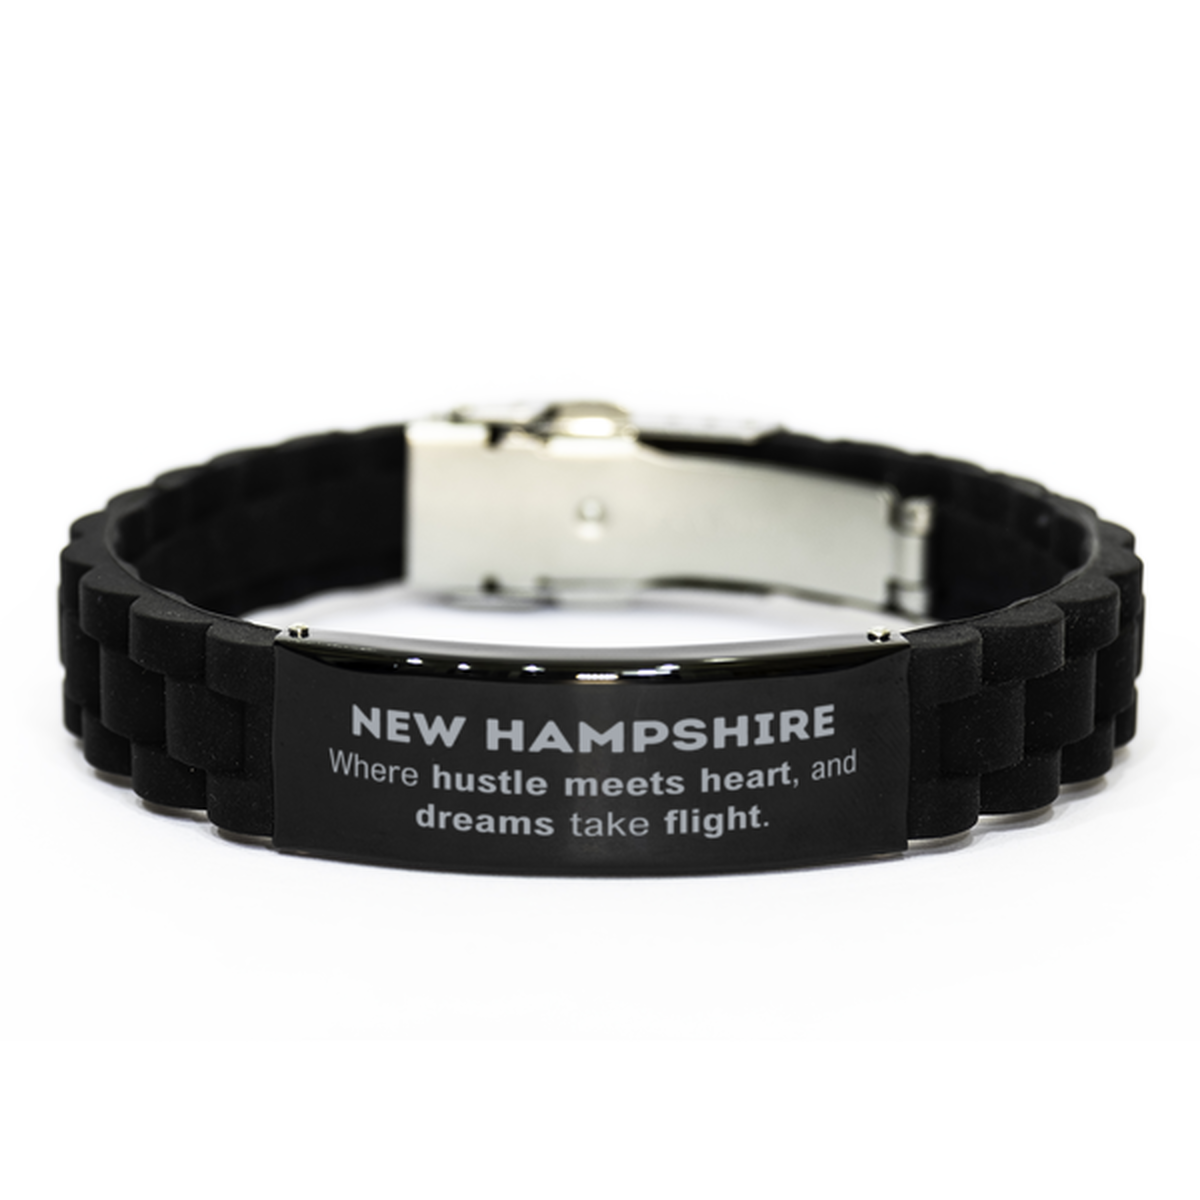 New Hampshire: Where hustle meets heart, and dreams take flight, New Hampshire Gifts, Proud New Hampshire Christmas Birthday New Hampshire Black Glidelock Clasp Bracelet, New Hampshire State People, Men, Women, Friends